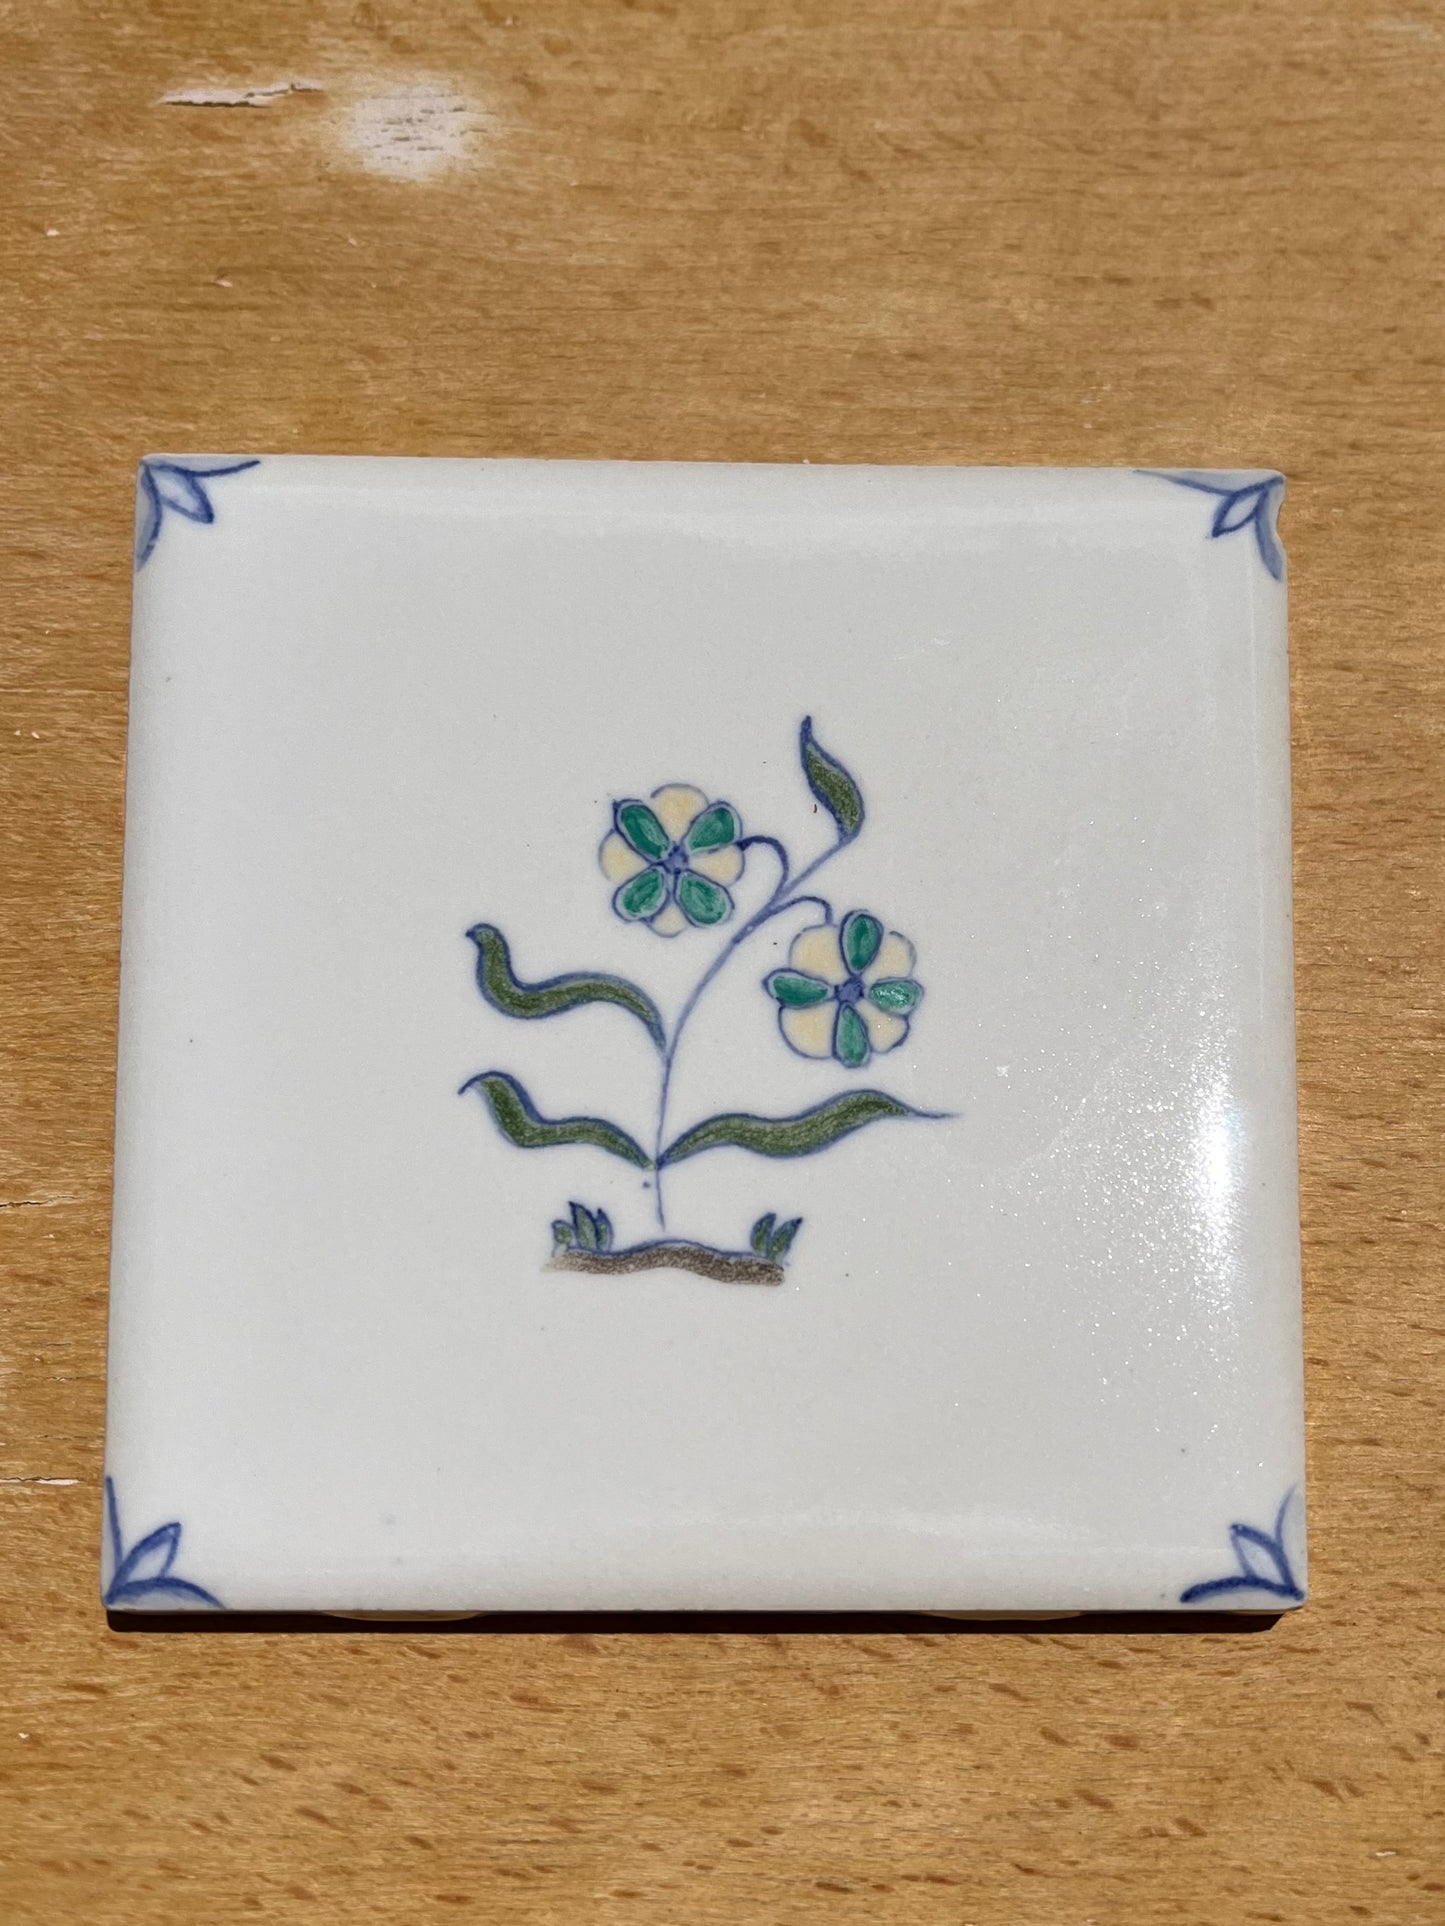 Nine hand painted 4.25" tiles, polychromatic Delft style